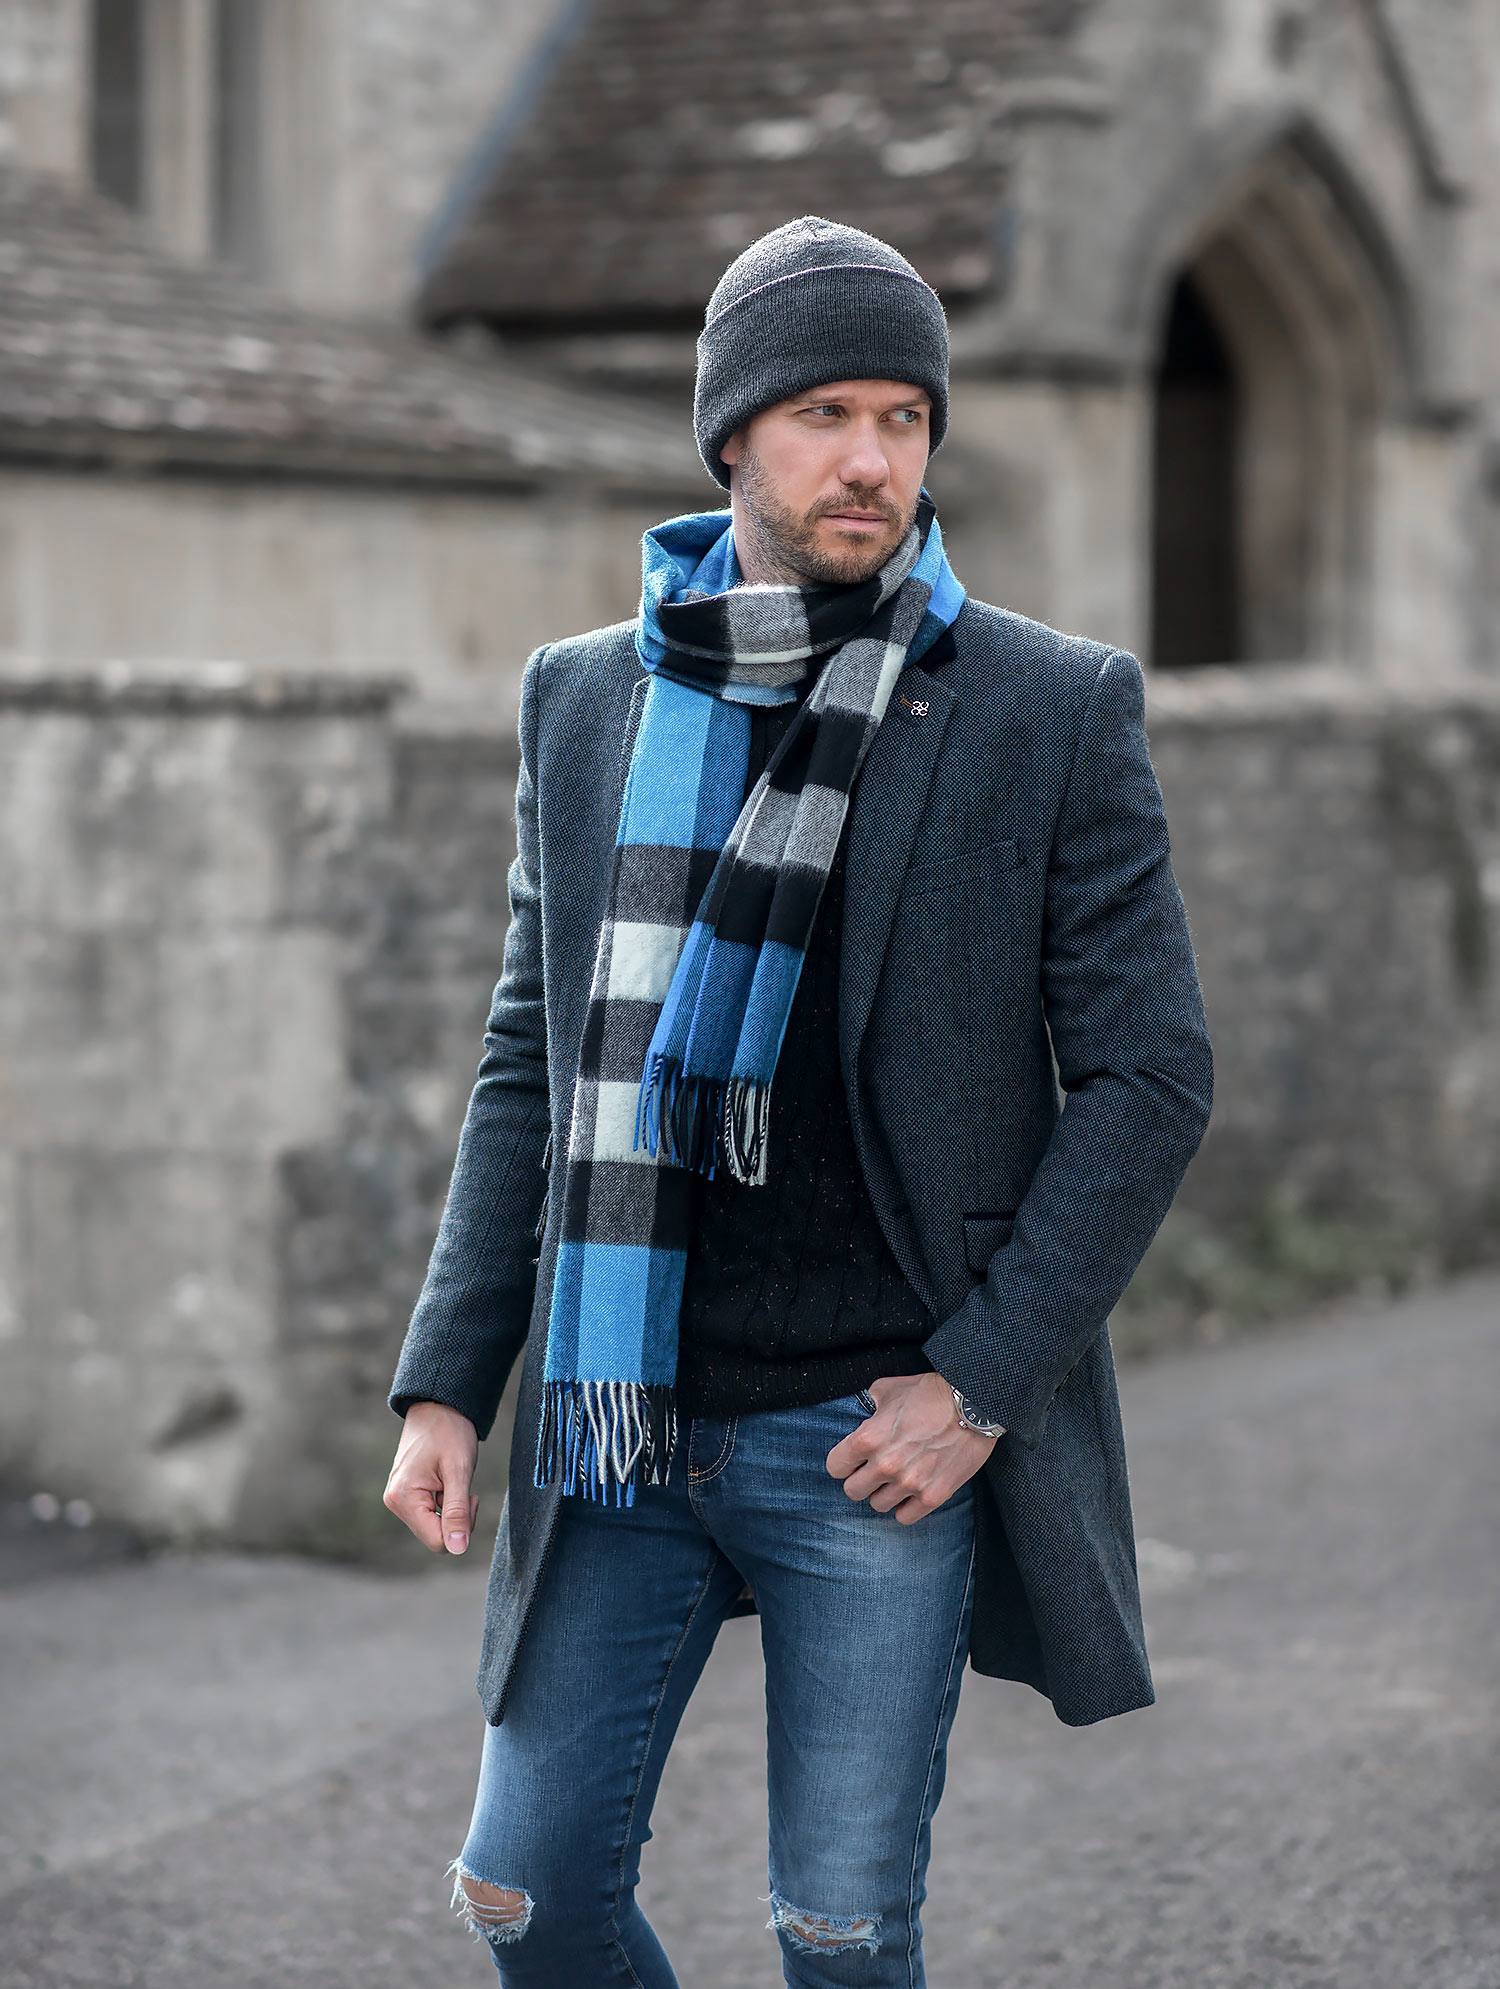 Ready For Winter With My Burberry Scarf | Your Average Guy